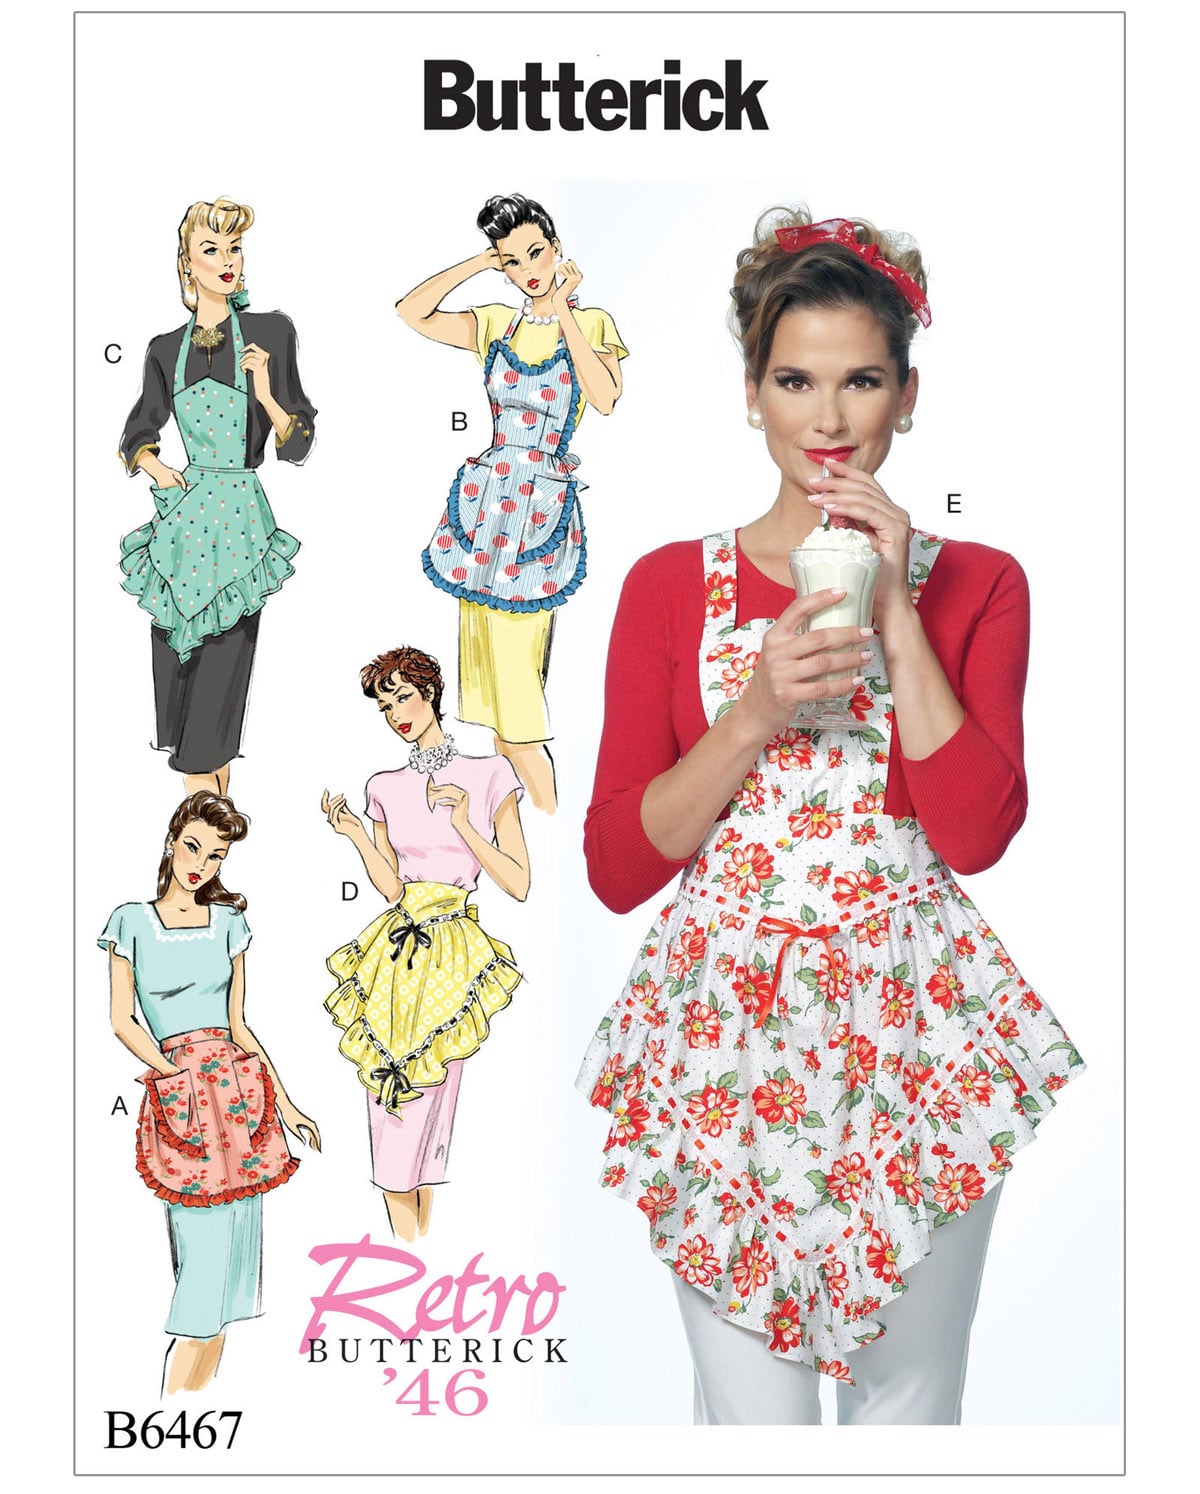 Summer sewing pattern trends